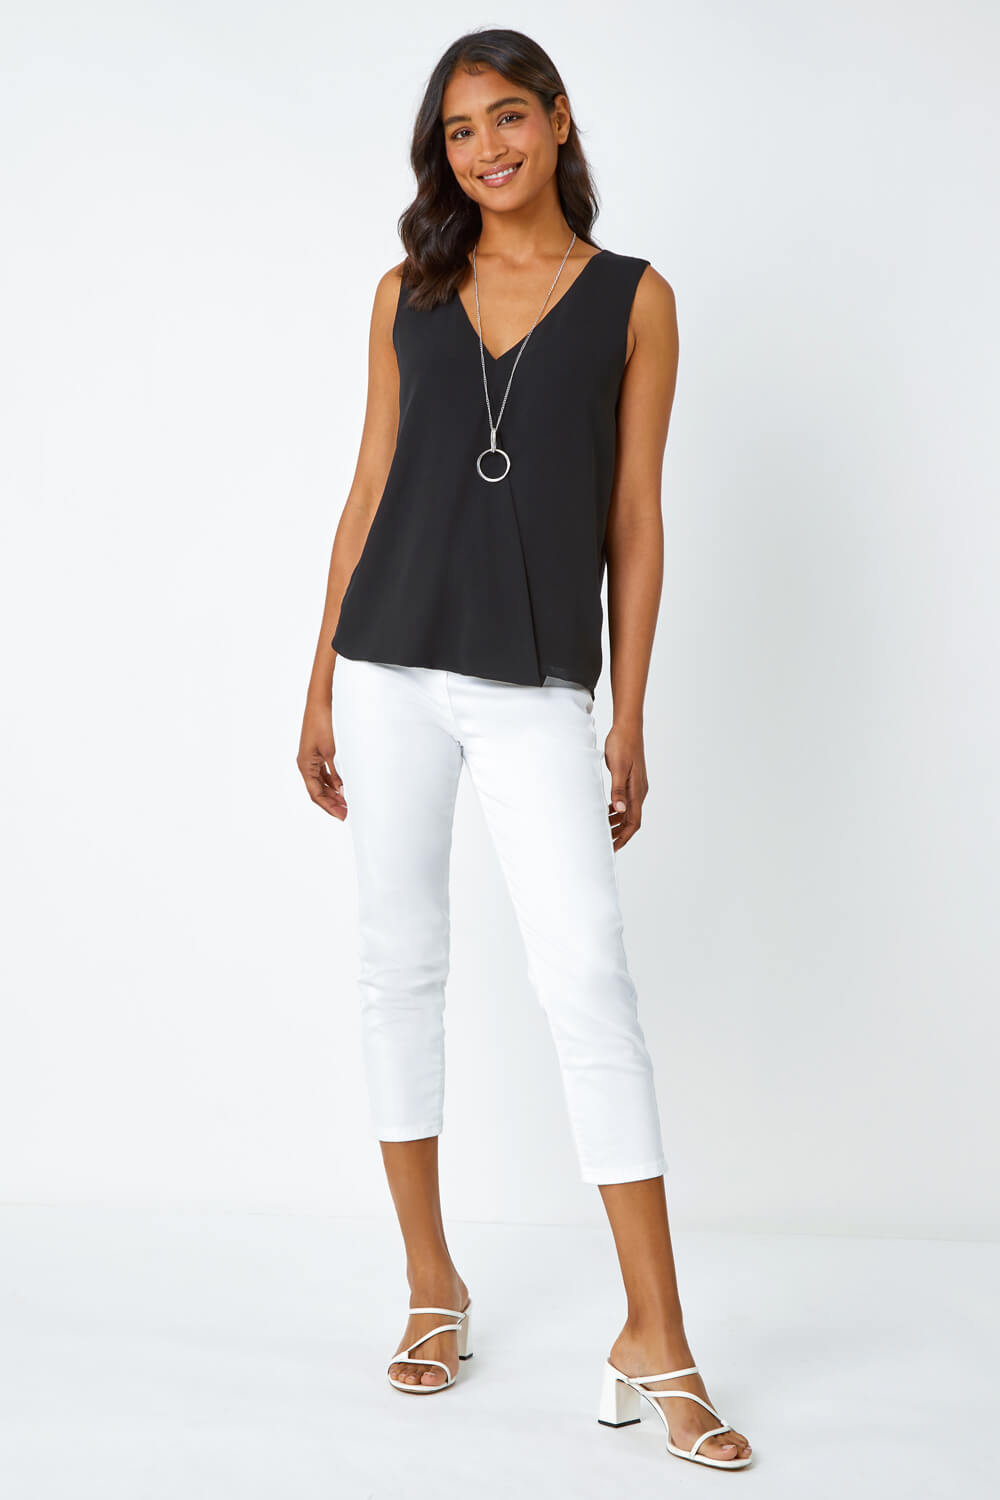 Black Sleeveless Vest Top with Necklace, Image 2 of 5